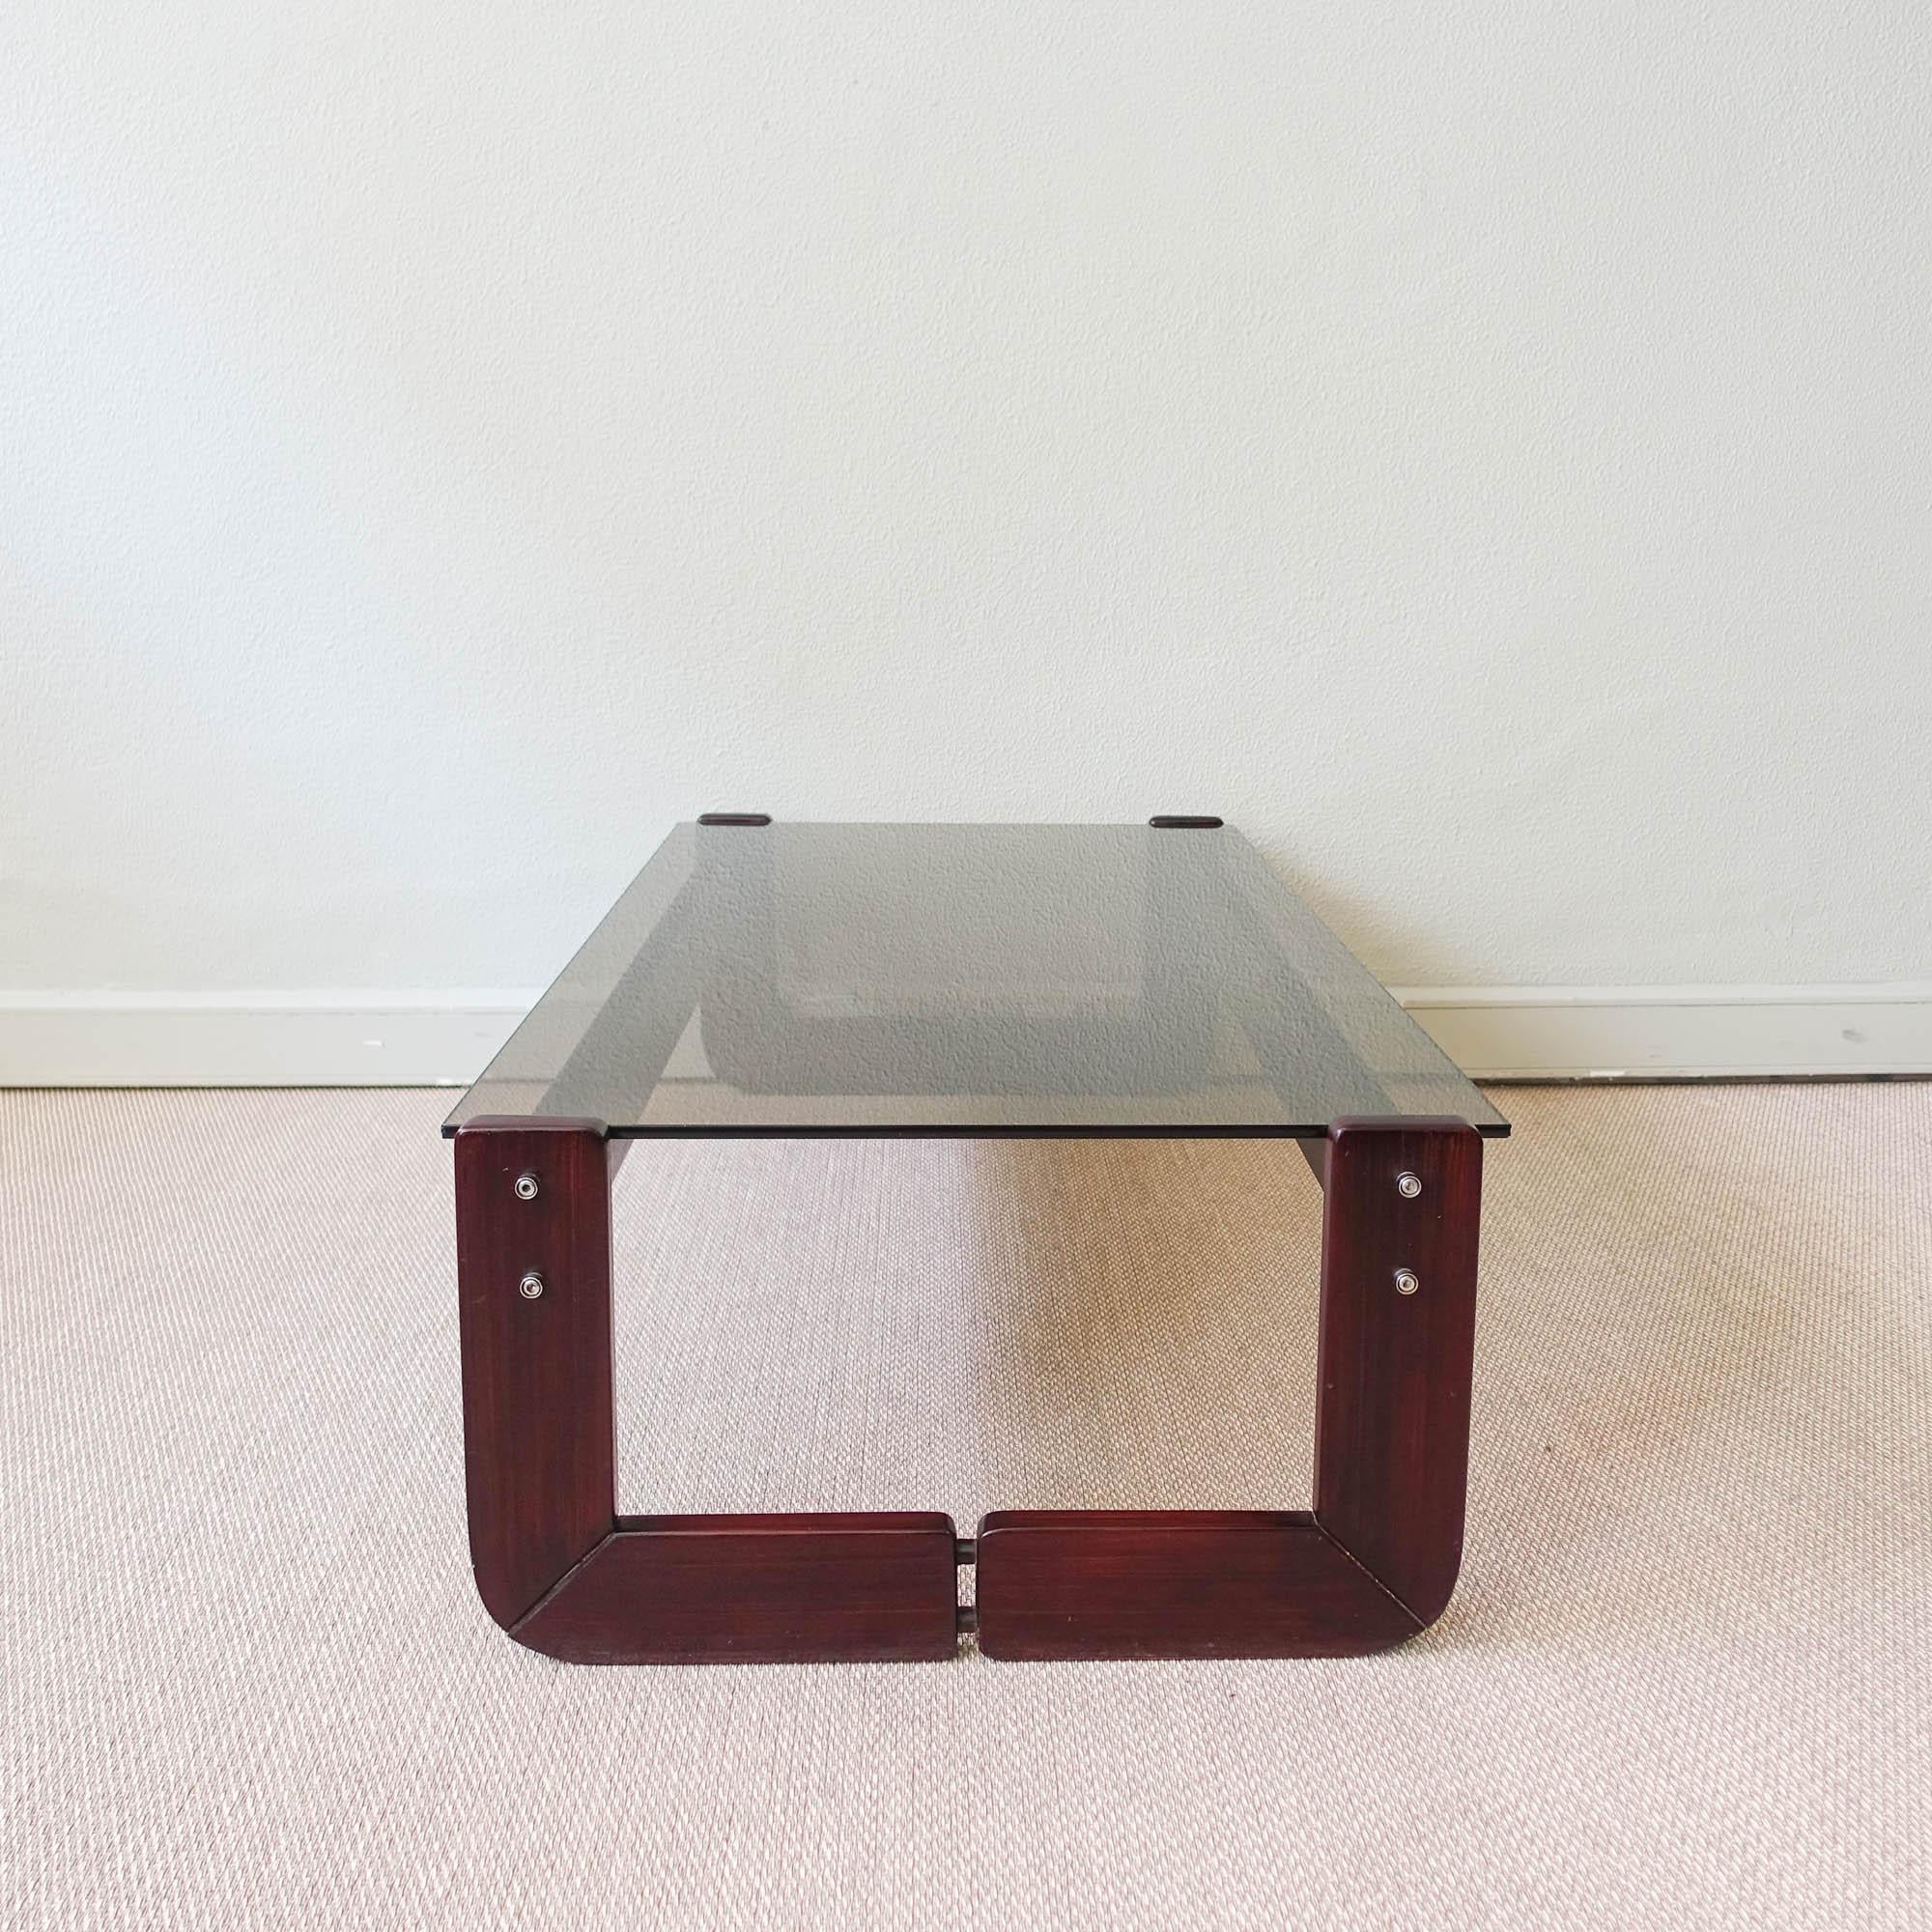 Percival Lafer Exotic Wood and Glass Coffee Table MP 97, 1970's For Sale 1